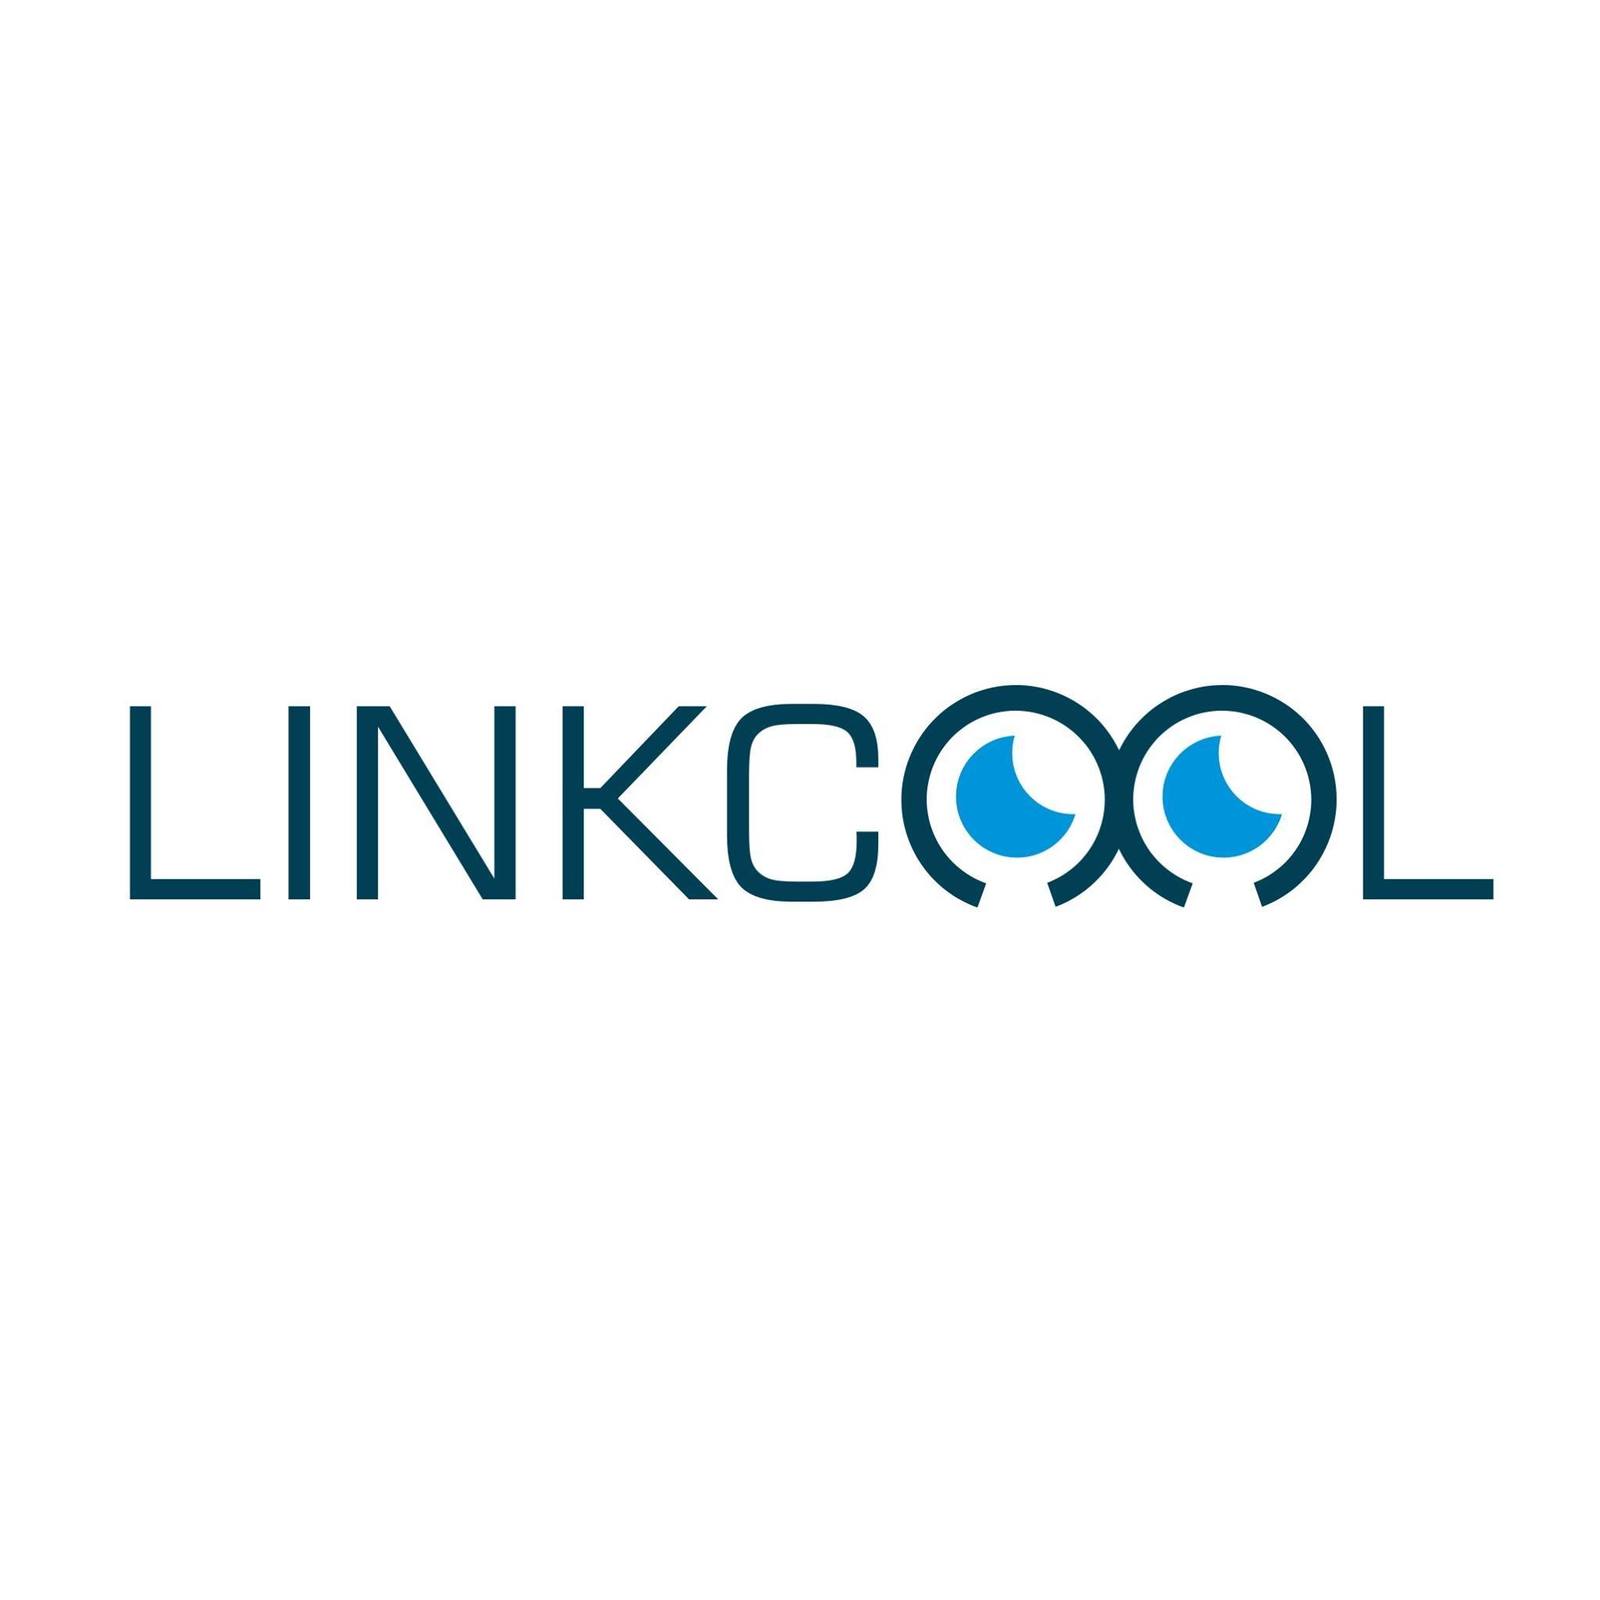 About Linkcool®